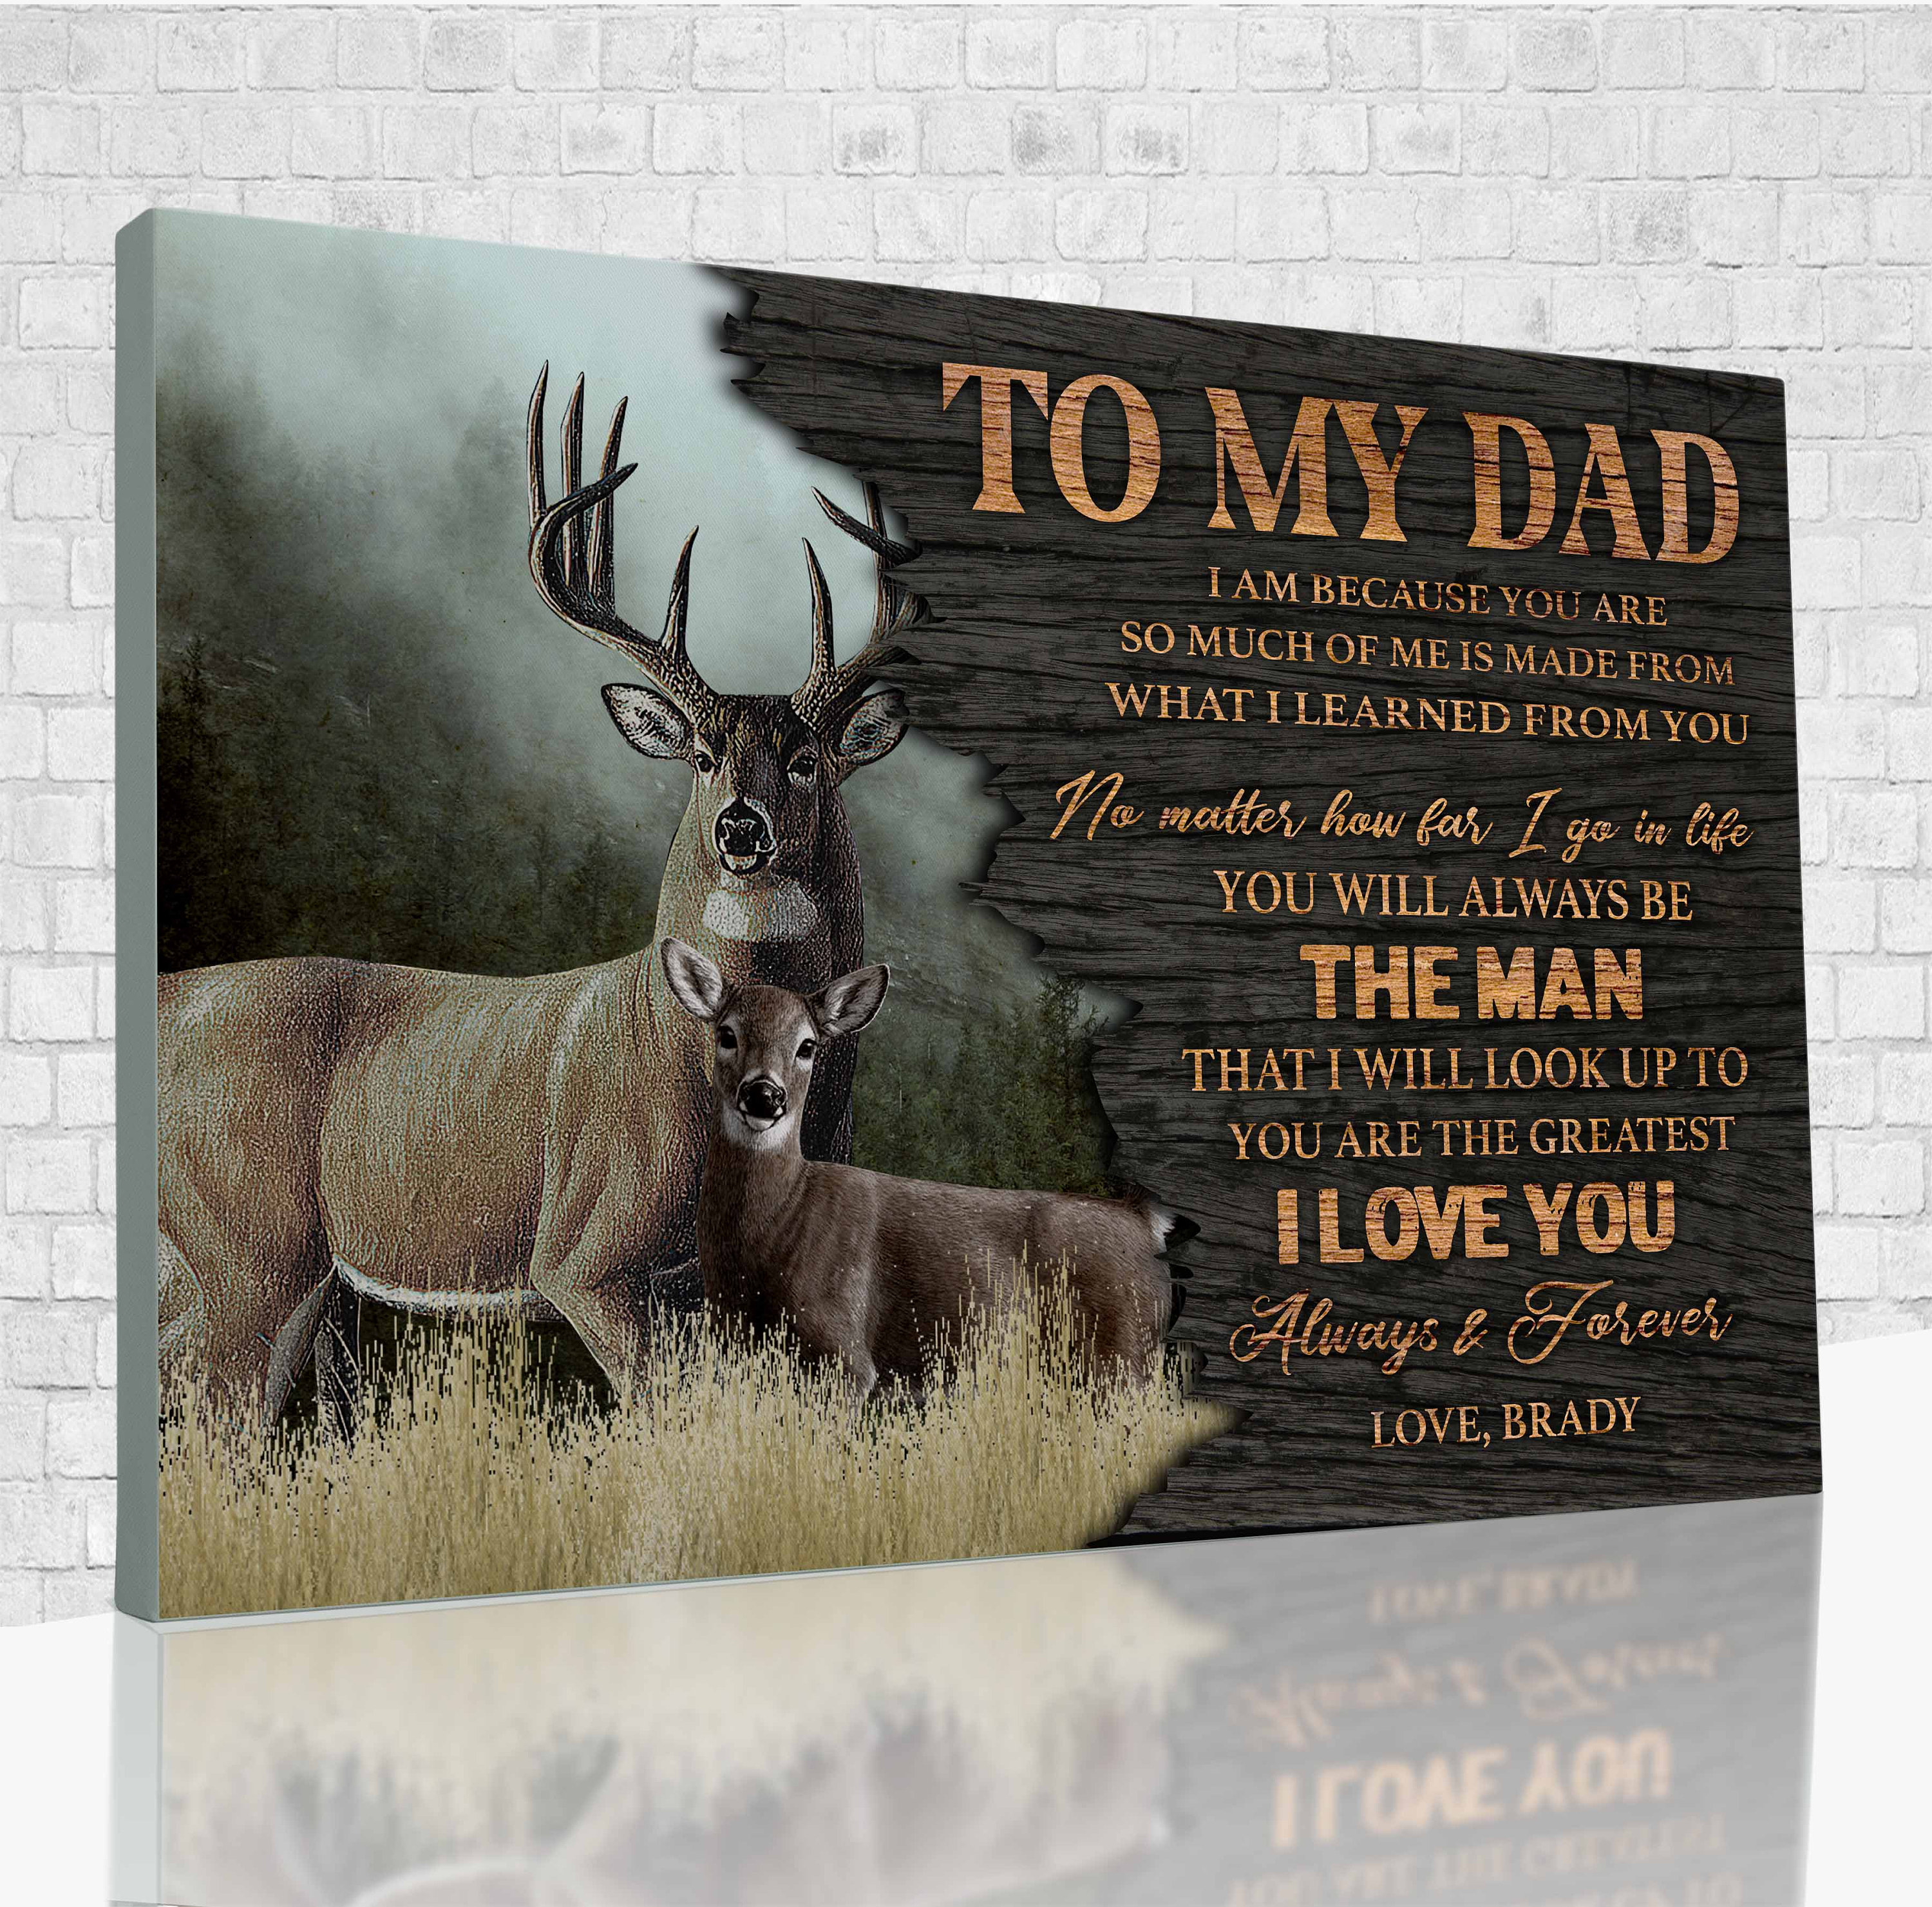 Fishing Gifts for Menhunting Gifts for Menphoto Gifts for Fishermenhunting  Signfathers Day Hunting Giftpersonalized Fathers Day Gifts 